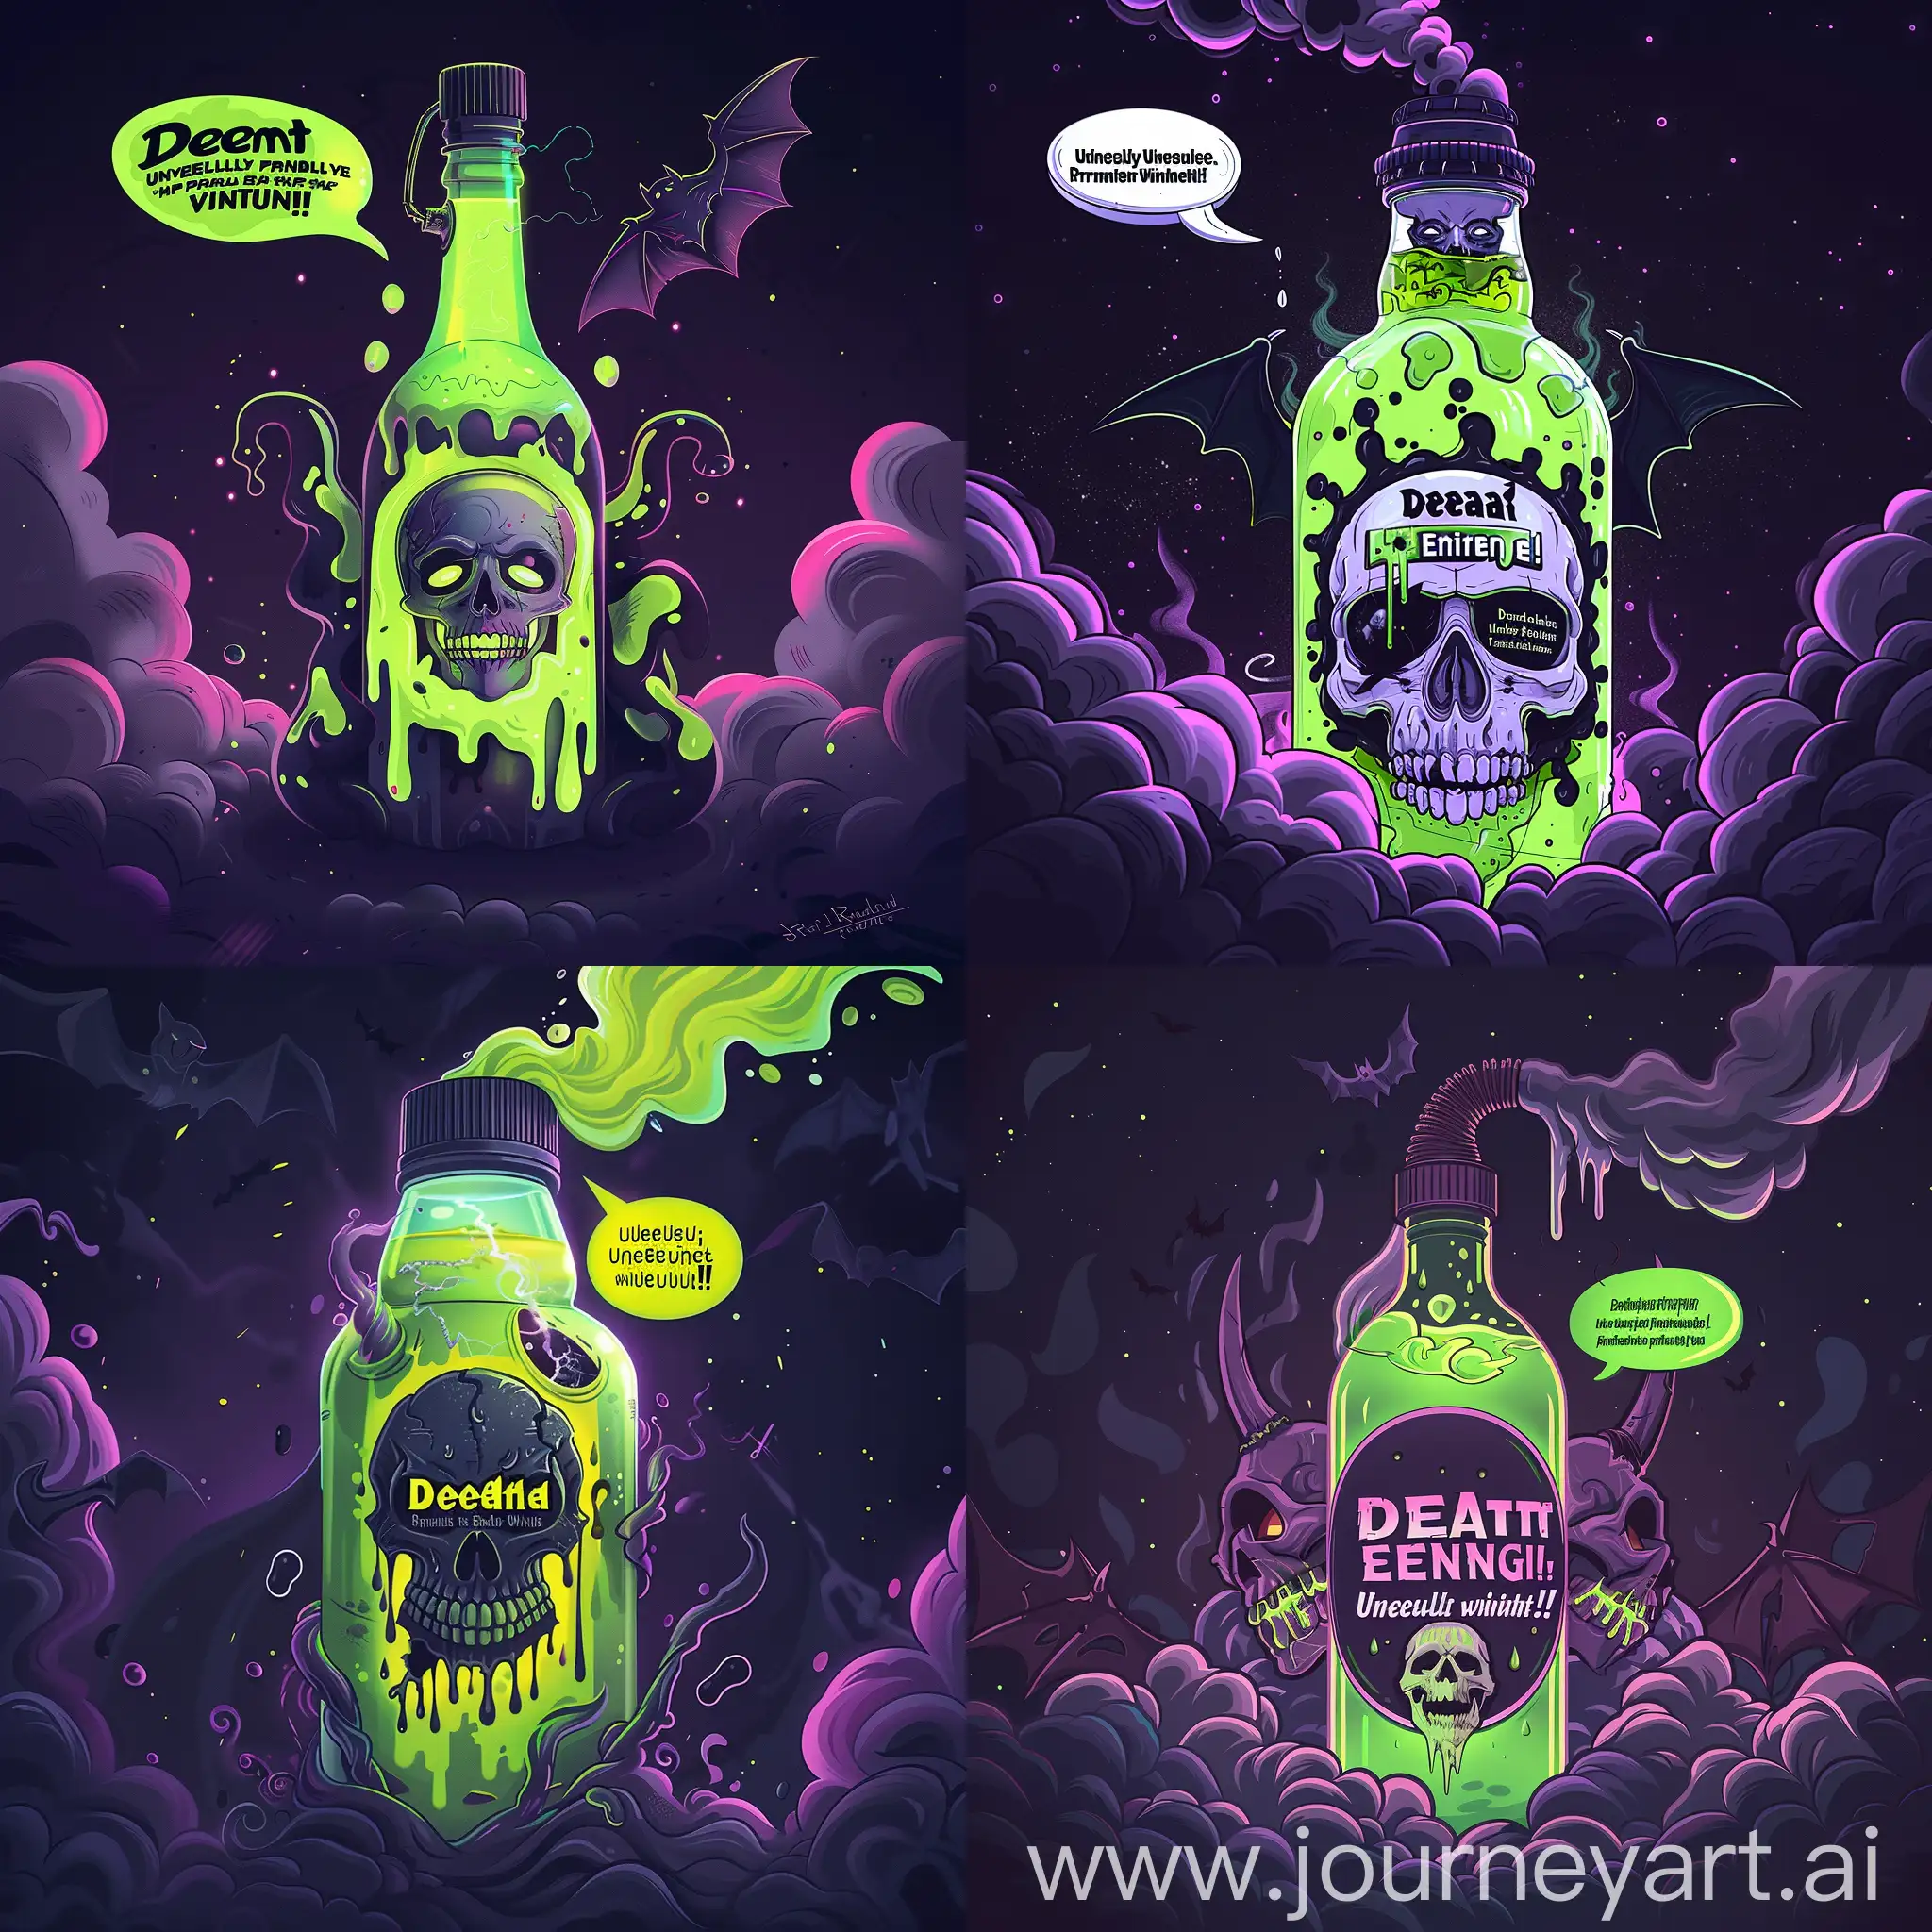 A captivating surreal illustration featuring a whimsical portrayal of Death as an energy drink. The bottle showcases a macabre reaper's skull as its label, adorned with a dripping, ghostly eye and a sinister grin. The neon green liquid inside emits an eerie glow, signifying the energy within. The bubble text reads: "Death Energy - Unleash the Grim Reaper Within!" The bottle's cap features a pair of bat wings, and the cloud of ominous black and purple smoke surrounding it adds to the darkly comedic atmosphere. The overall design combines dark humor with a Gothic aesthetic, creating a playful and intriguing visual experience., illustration